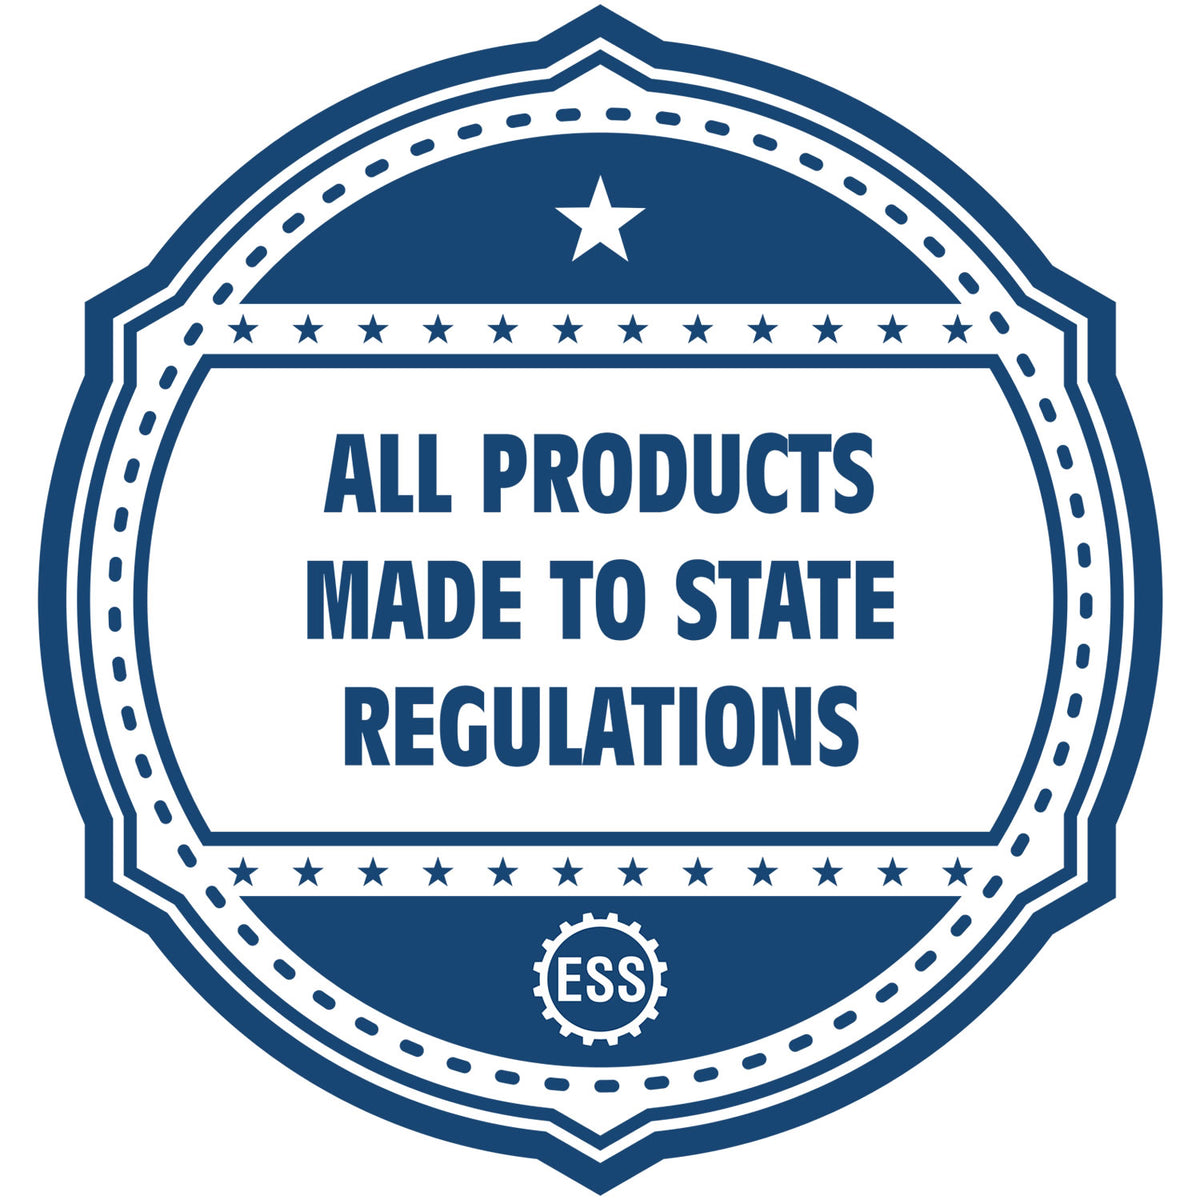 An icon or badge element for the Slim Pre-Inked Kentucky Architect Seal Stamp showing that this product is made in compliance with state regulations.